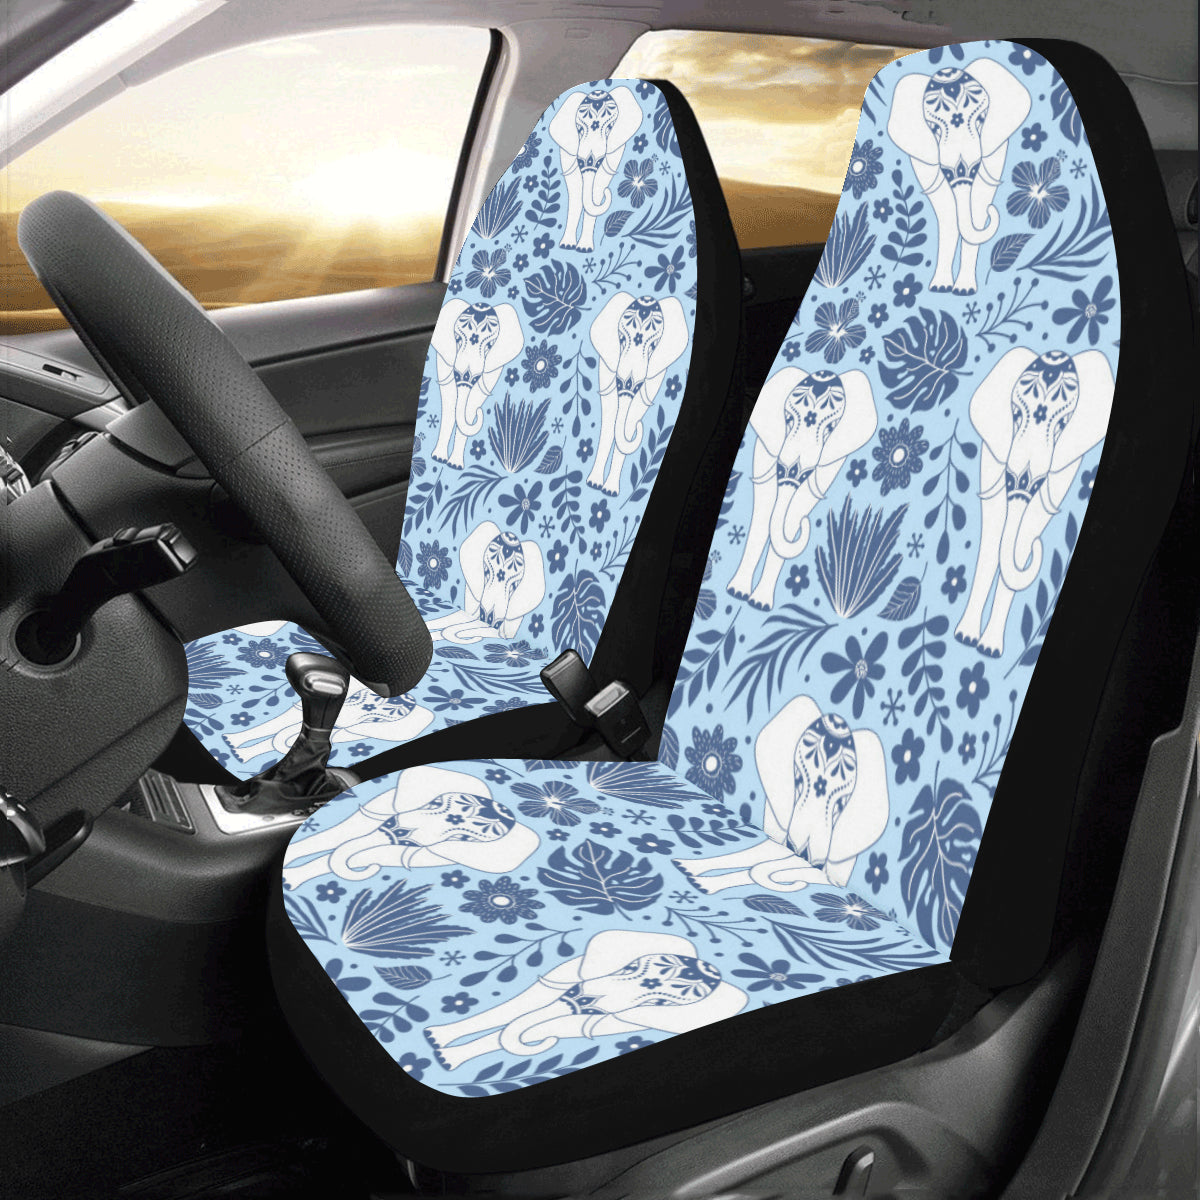 Elephant Car Seat Covers Set of 2pcs, Blue Mandala Seat Cover Cute Front Seat Covers, Car SUV Vans Seat Protector Accessory Starcove Fashion